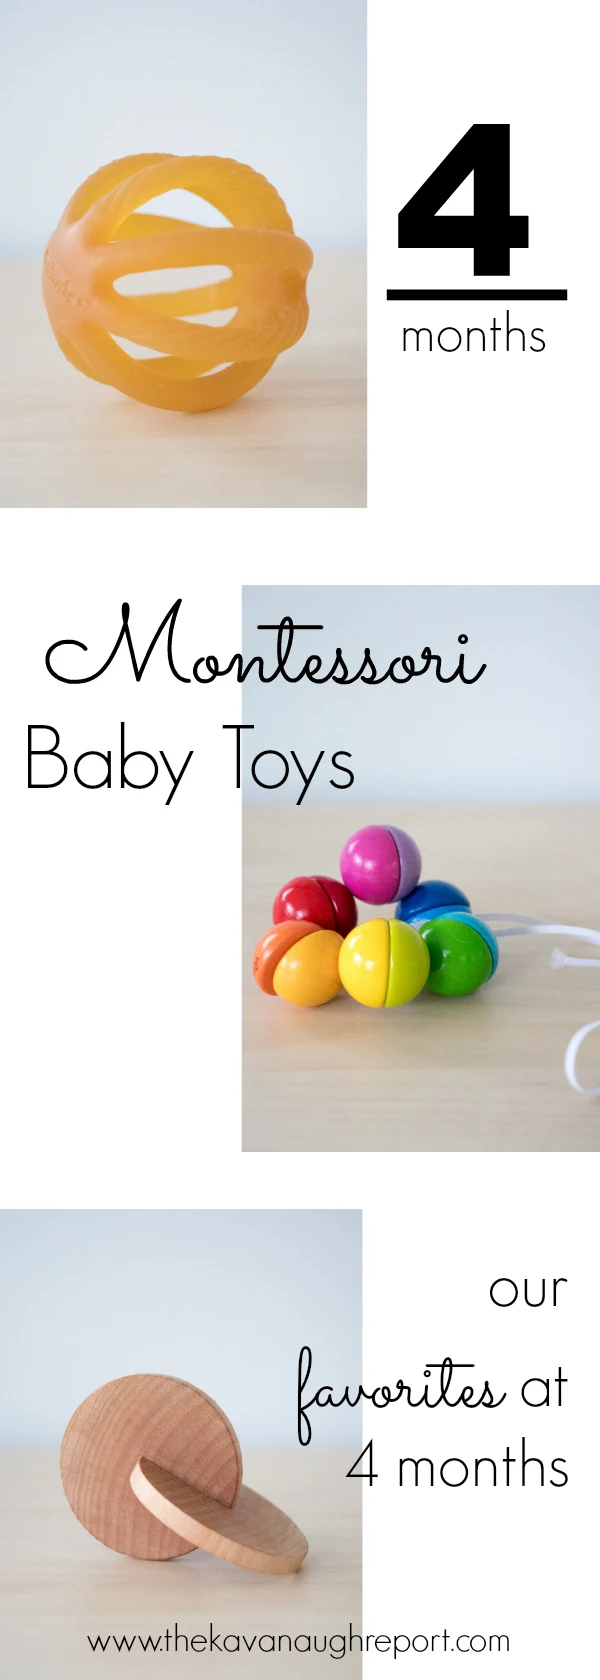 Montessori baby toys at 4-months-old. These Montessori friendly materials are engaging for young infants and provide sensory experiences.